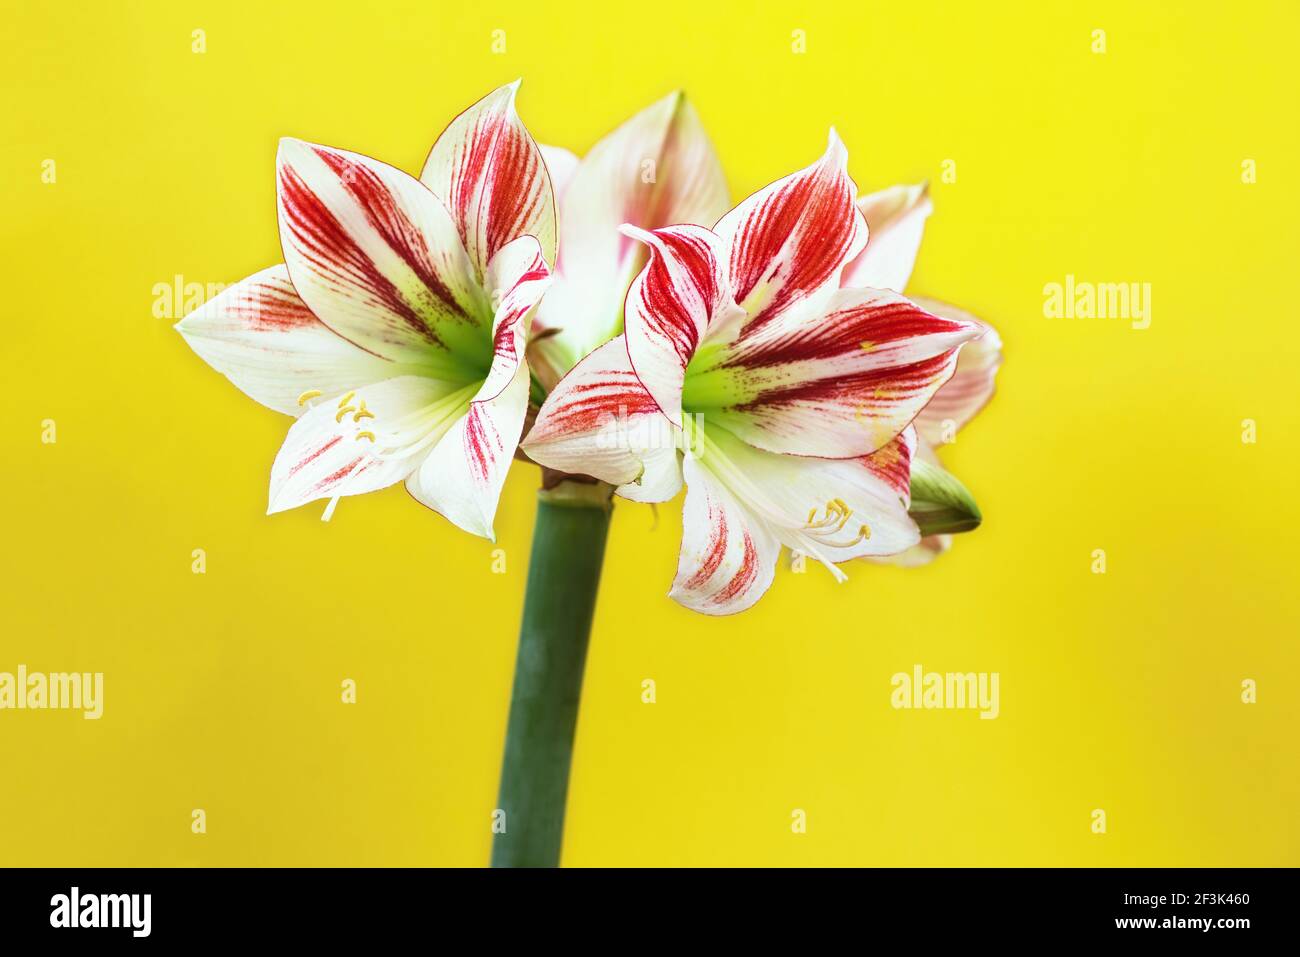 Blooming flower head of Amaryllis, white-red striped cultivar, on yellow background. Stock Photo